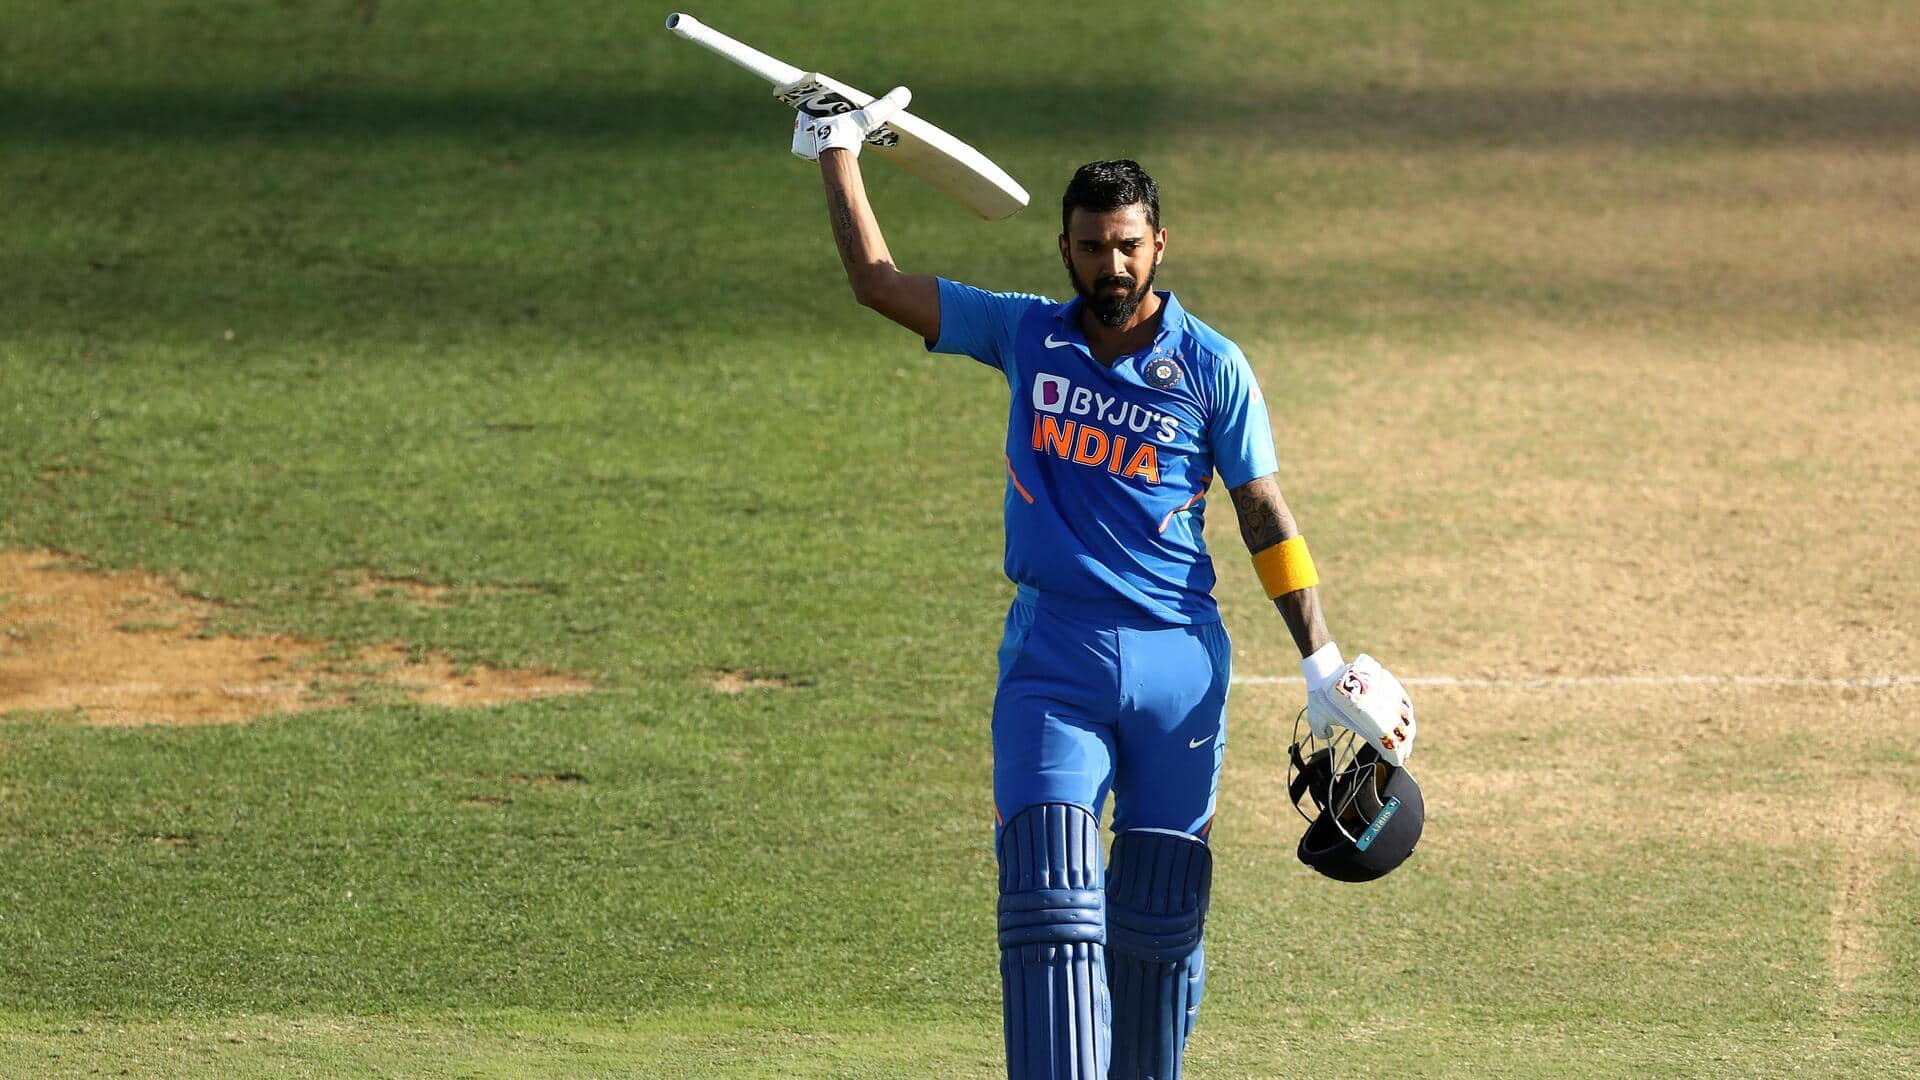 The curious case of KL Rahul: His ODI numbers